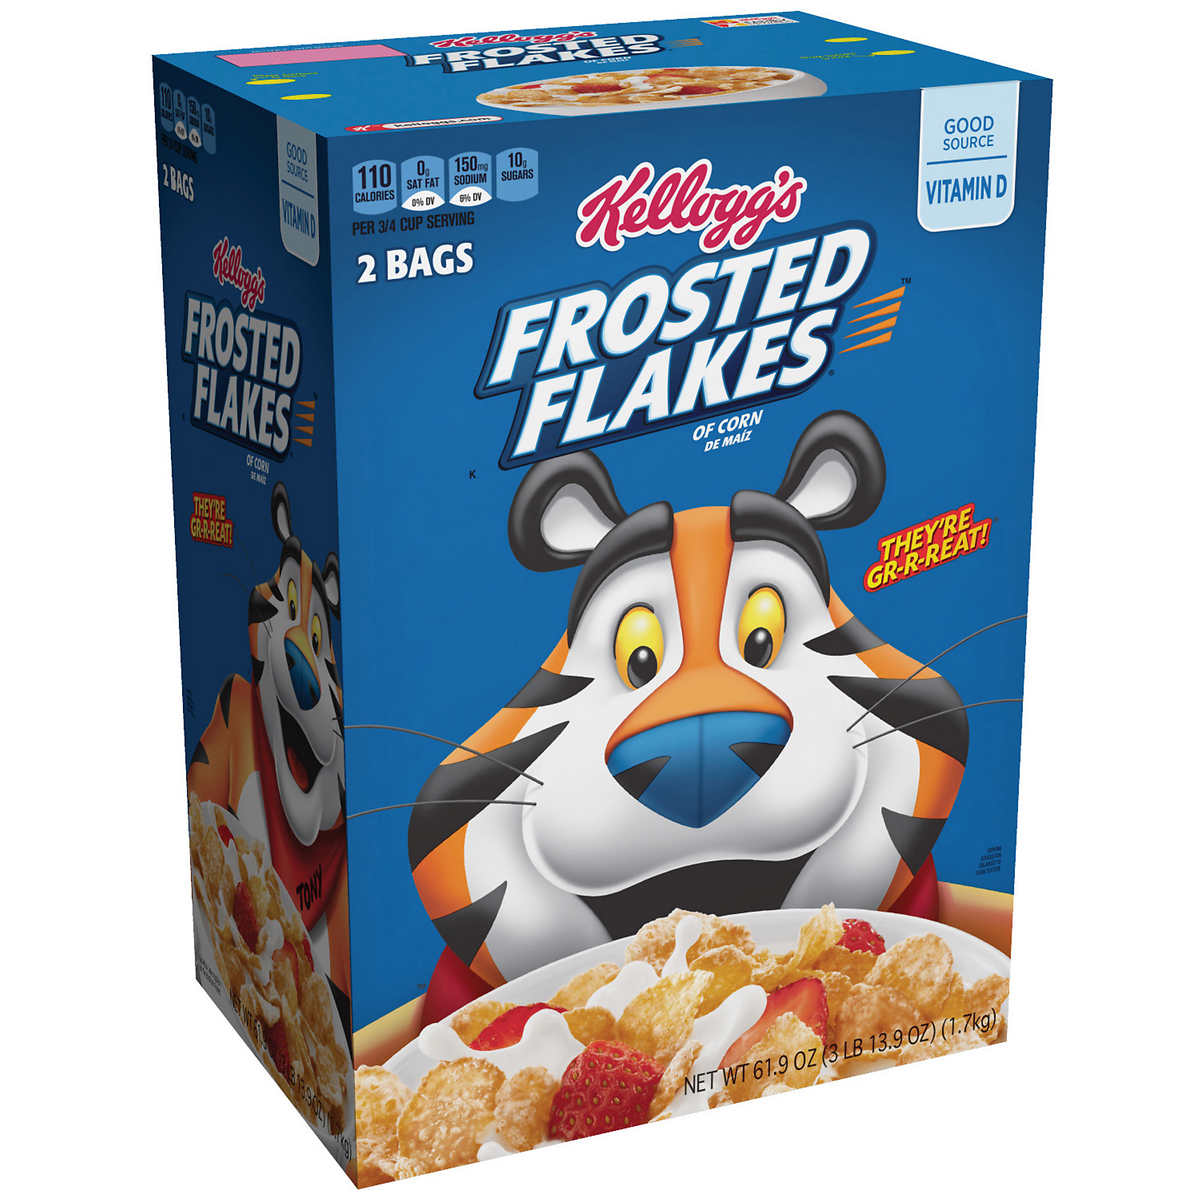 Kellogg's Frosted Flakes morgenmad , 850 gram, i to poser
Kellogg's Frosted Flakes Cereal, 30.95 oz, 2-count